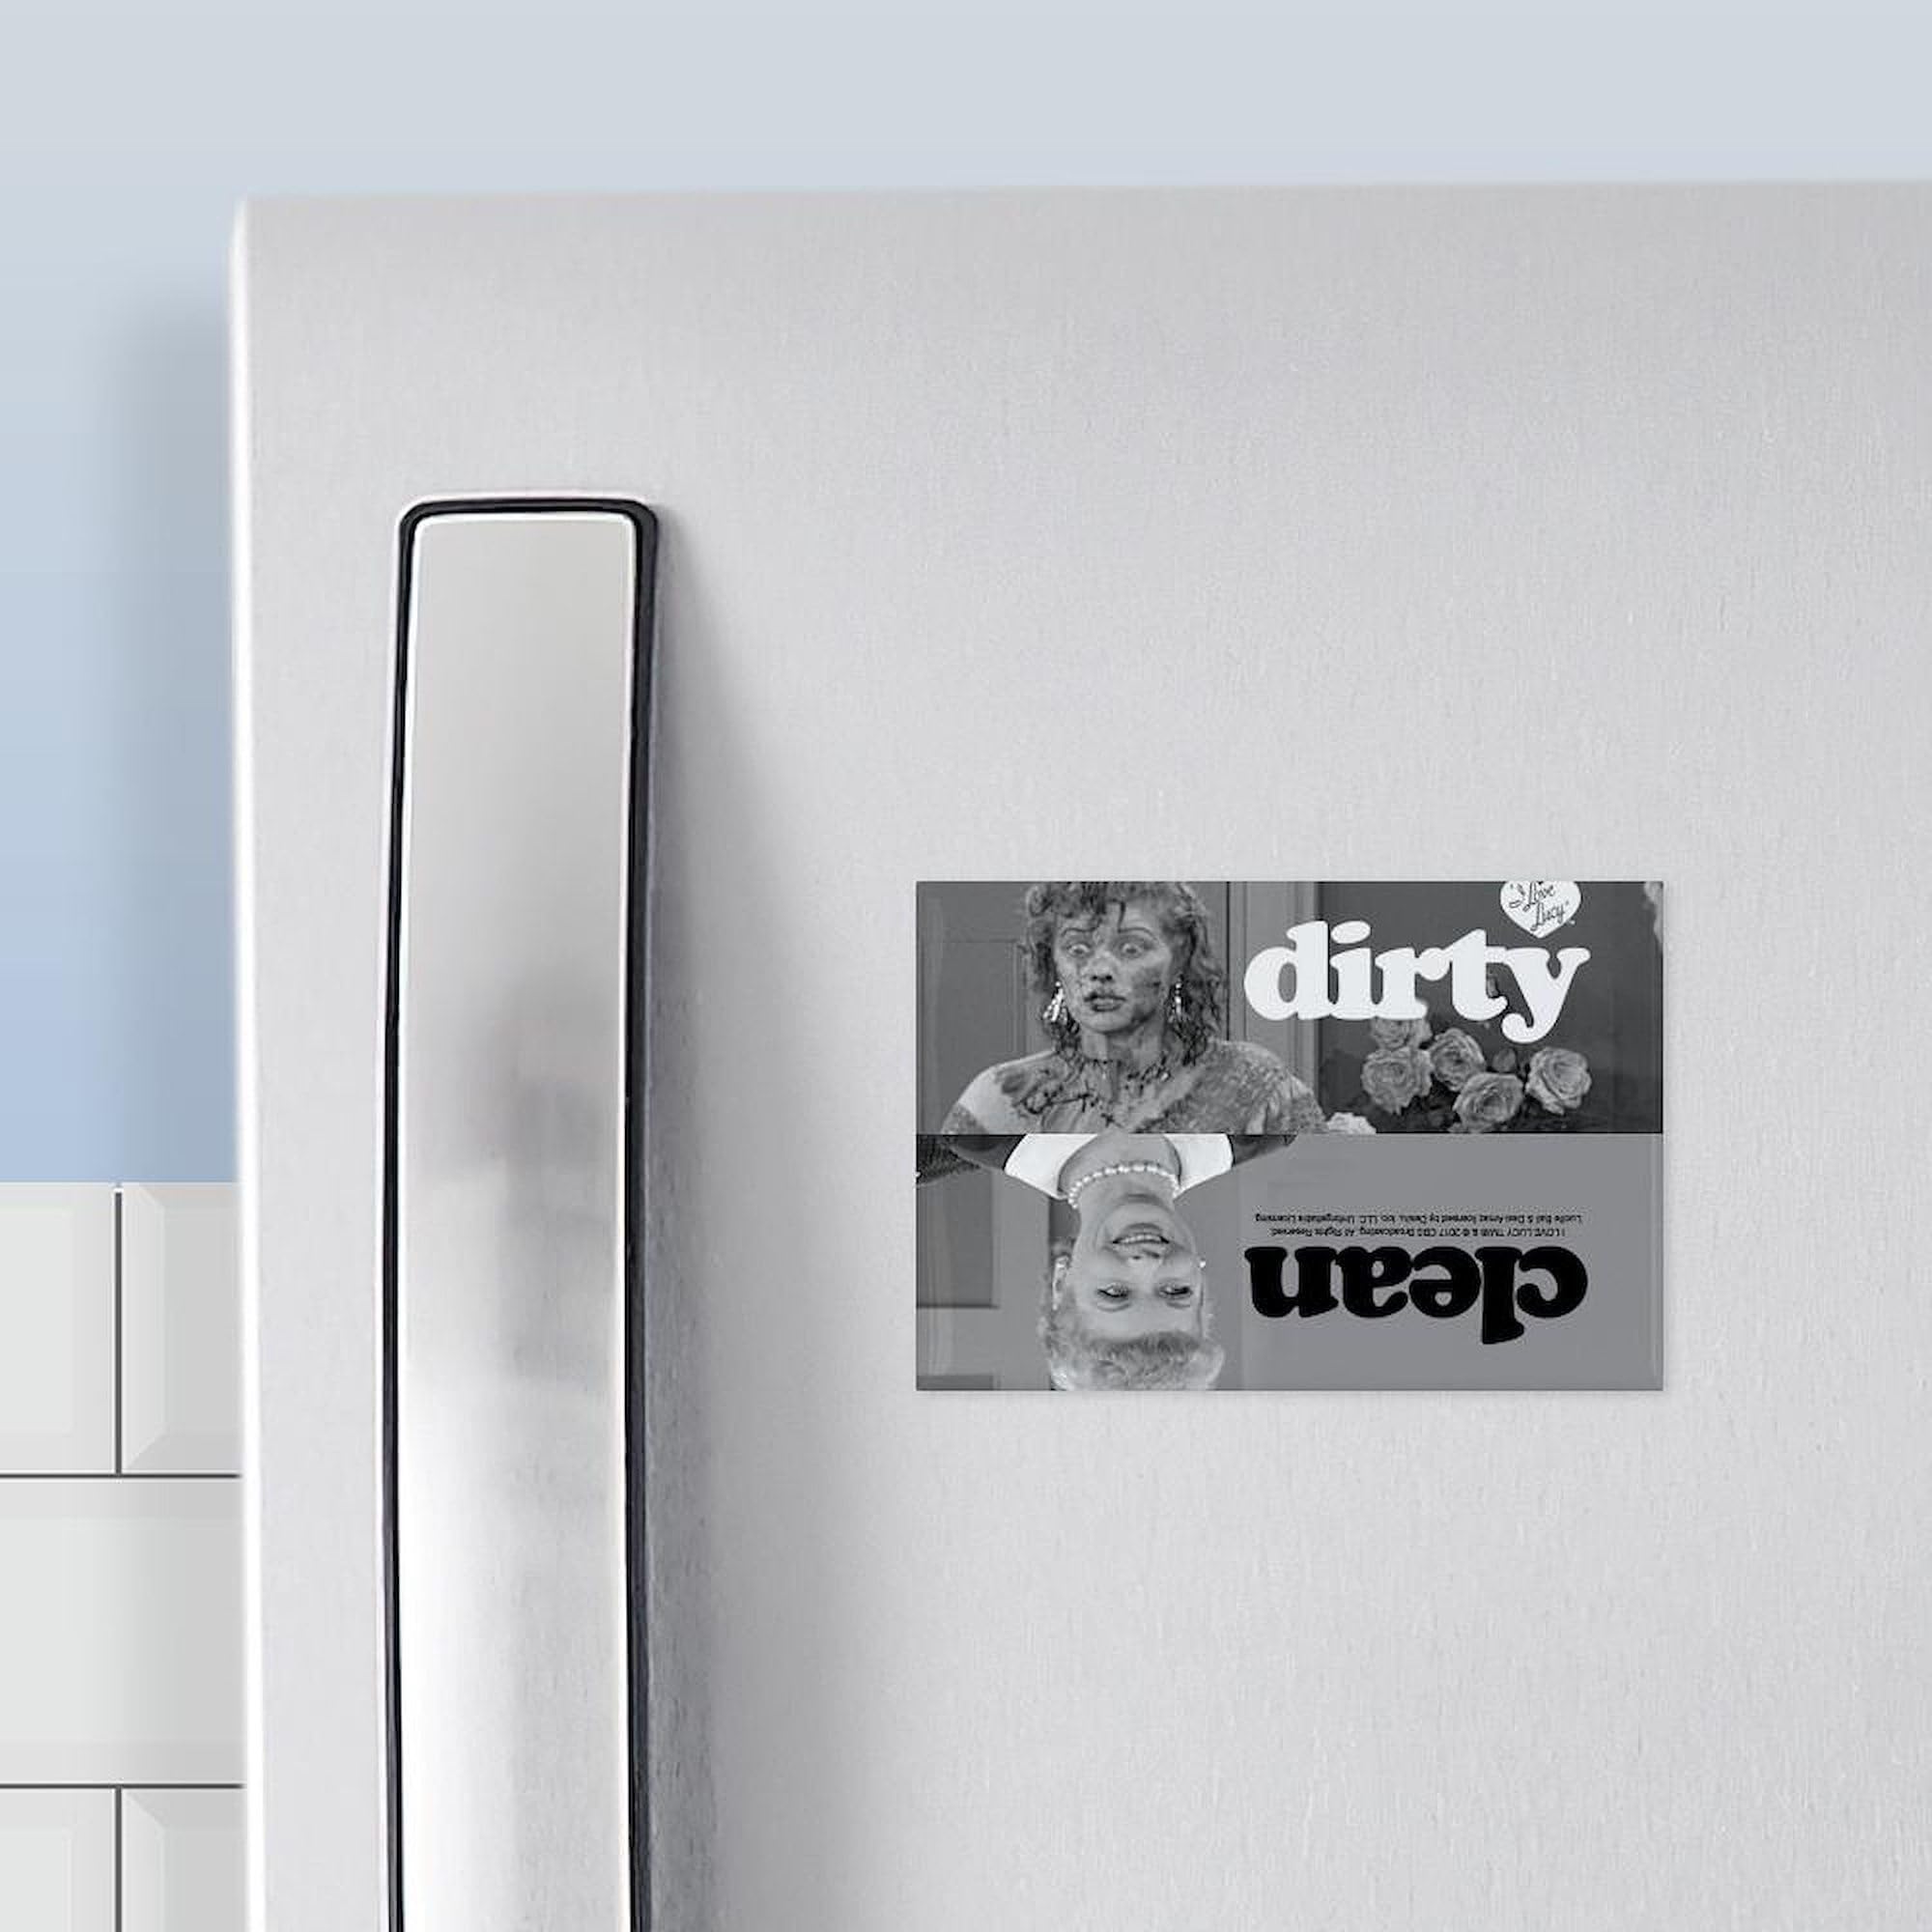 CafePress Lucy Dirty Clean Rectangle Magnet, 3"x2" Refrigerator Magnet